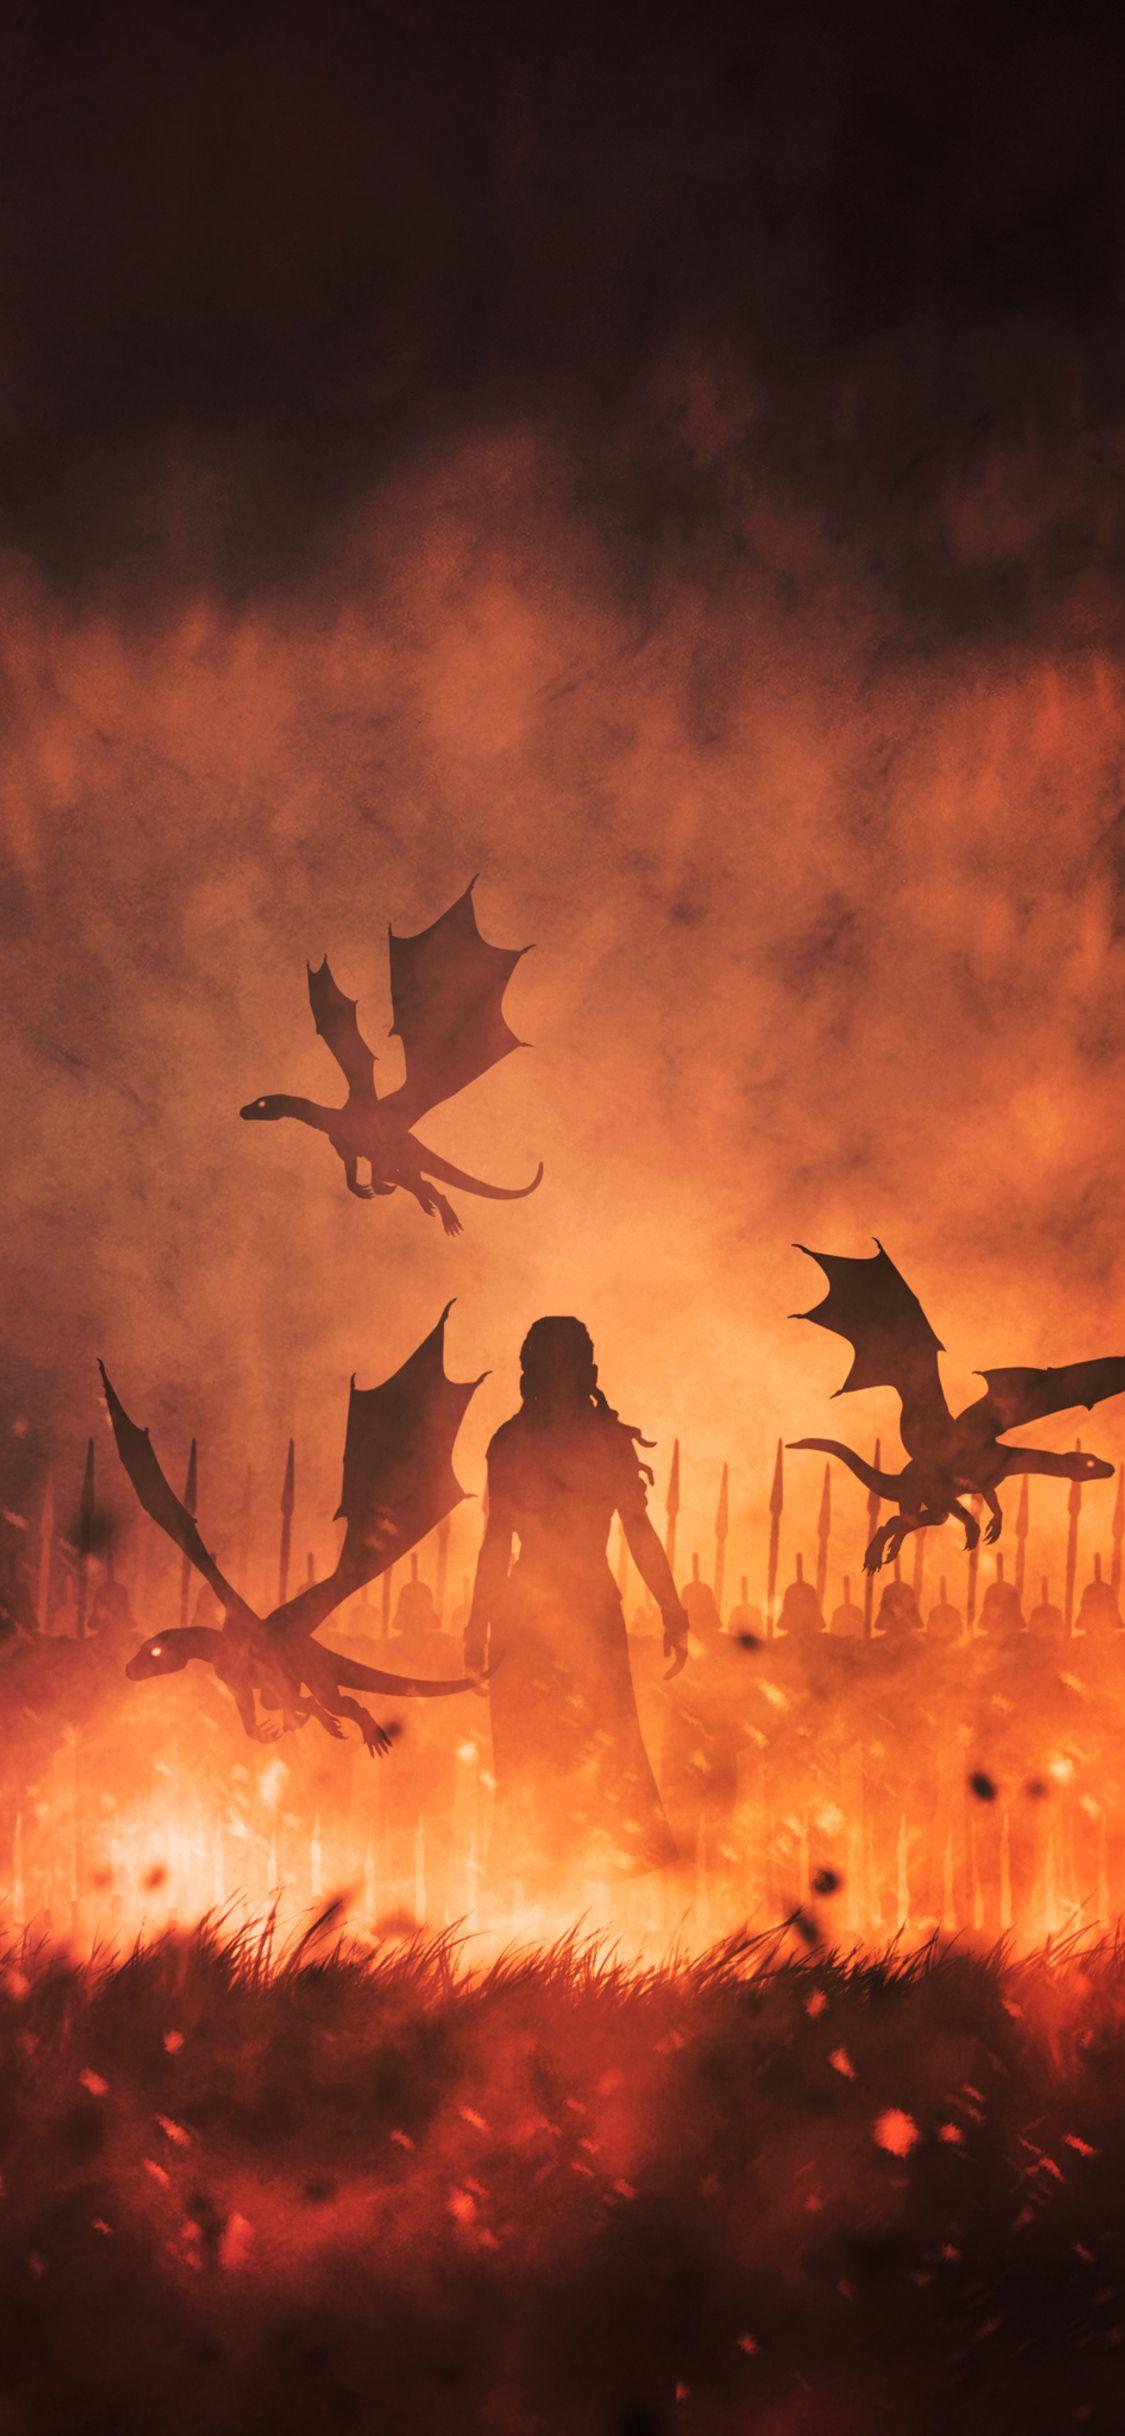 Live wallpaper Game of Thrones-Dragon DOWNLOAD (1133096660)